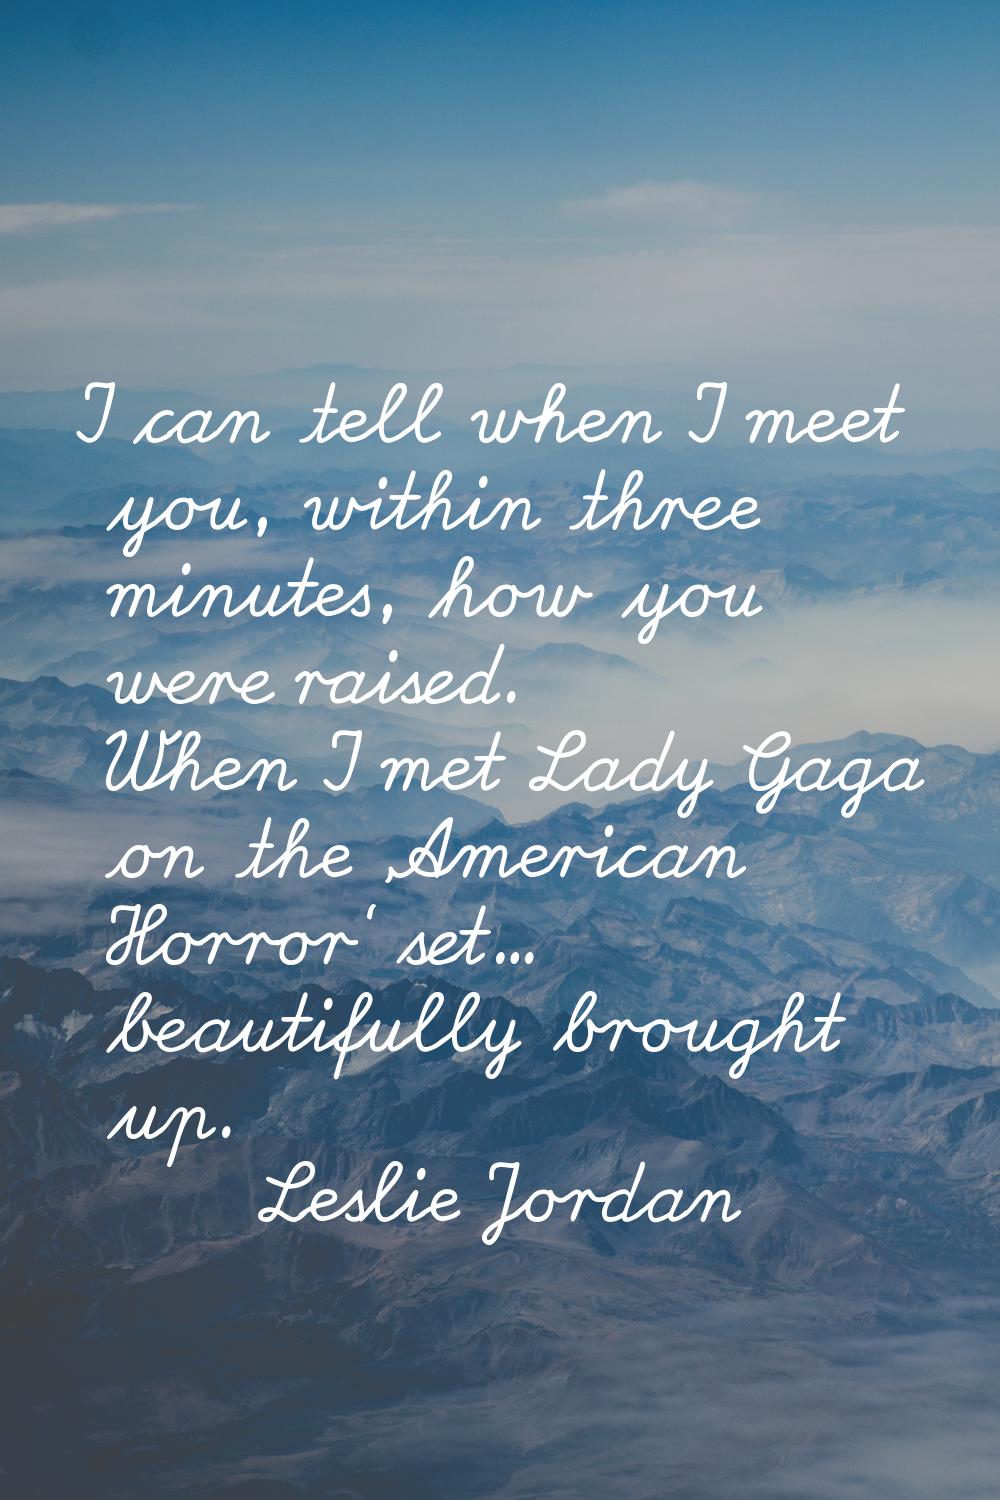 I can tell when I meet you, within three minutes, how you were raised. When I met Lady Gaga on the 